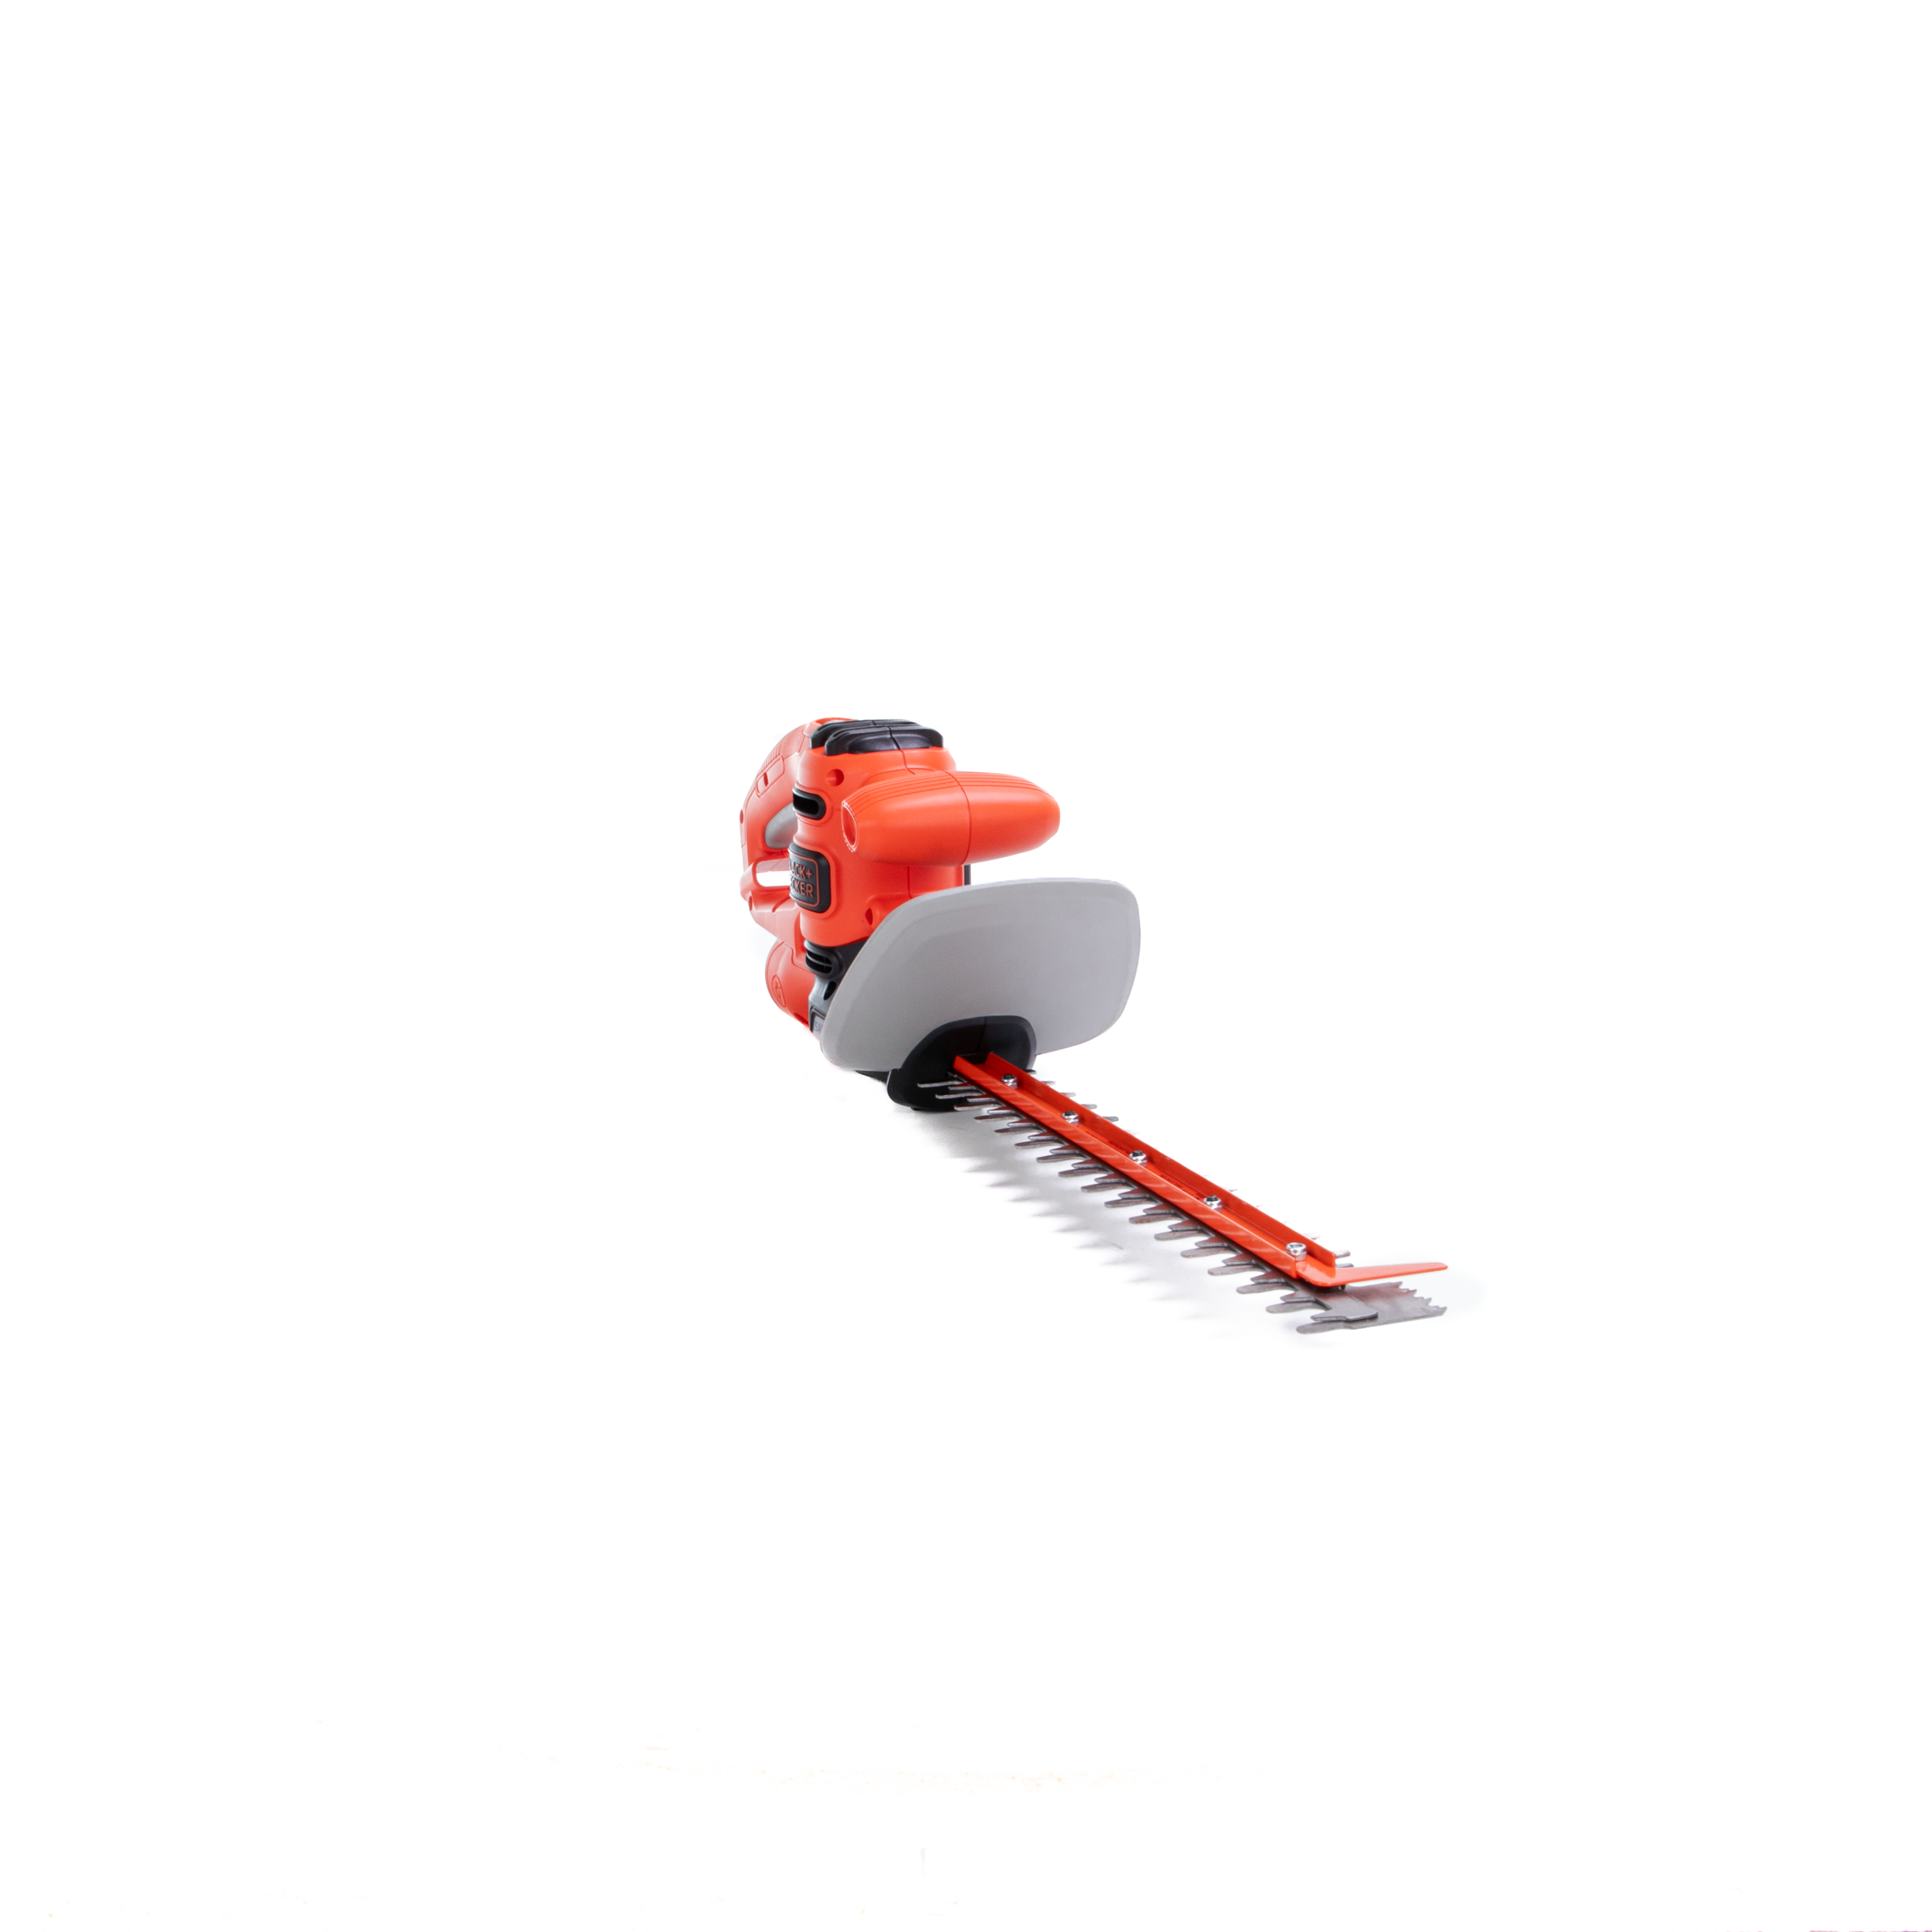 Hedge Trimmer, Dual-Action Blade, 16-Inch